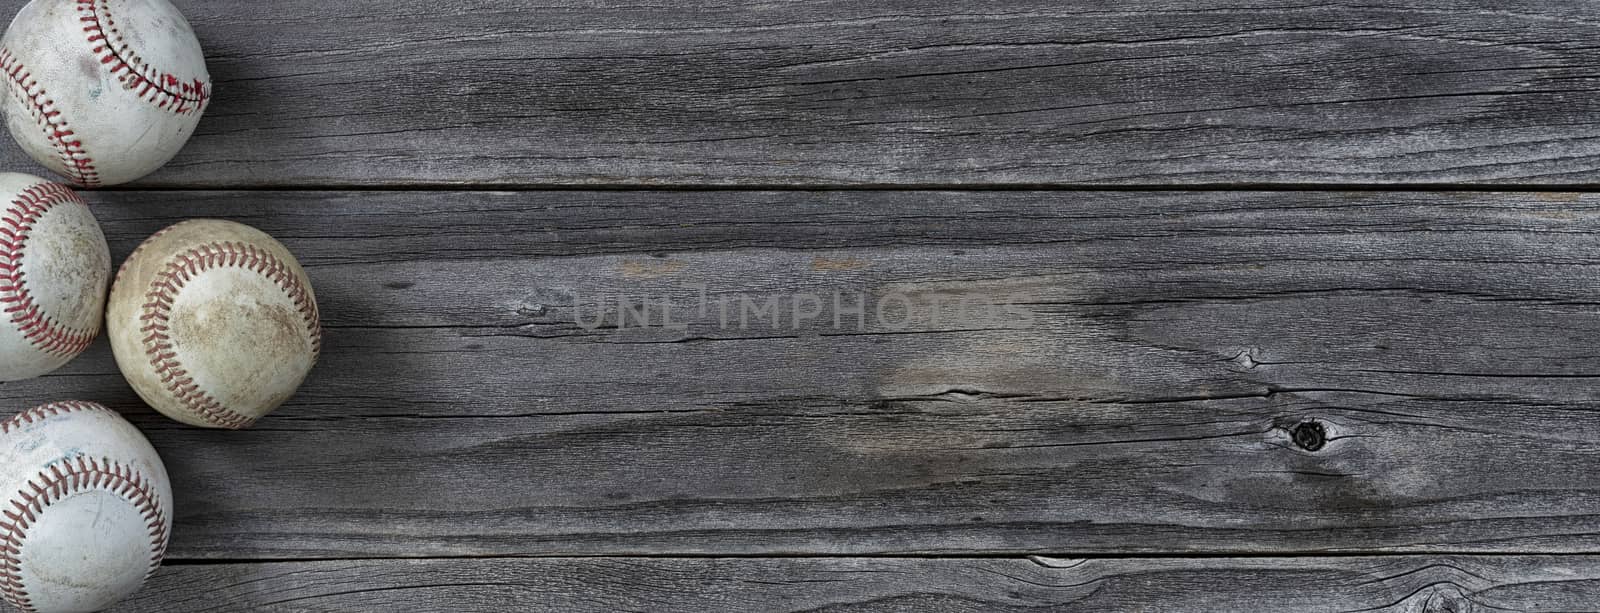 Old used baseballs on vintage wooden background. Baseball sports concept with copy space